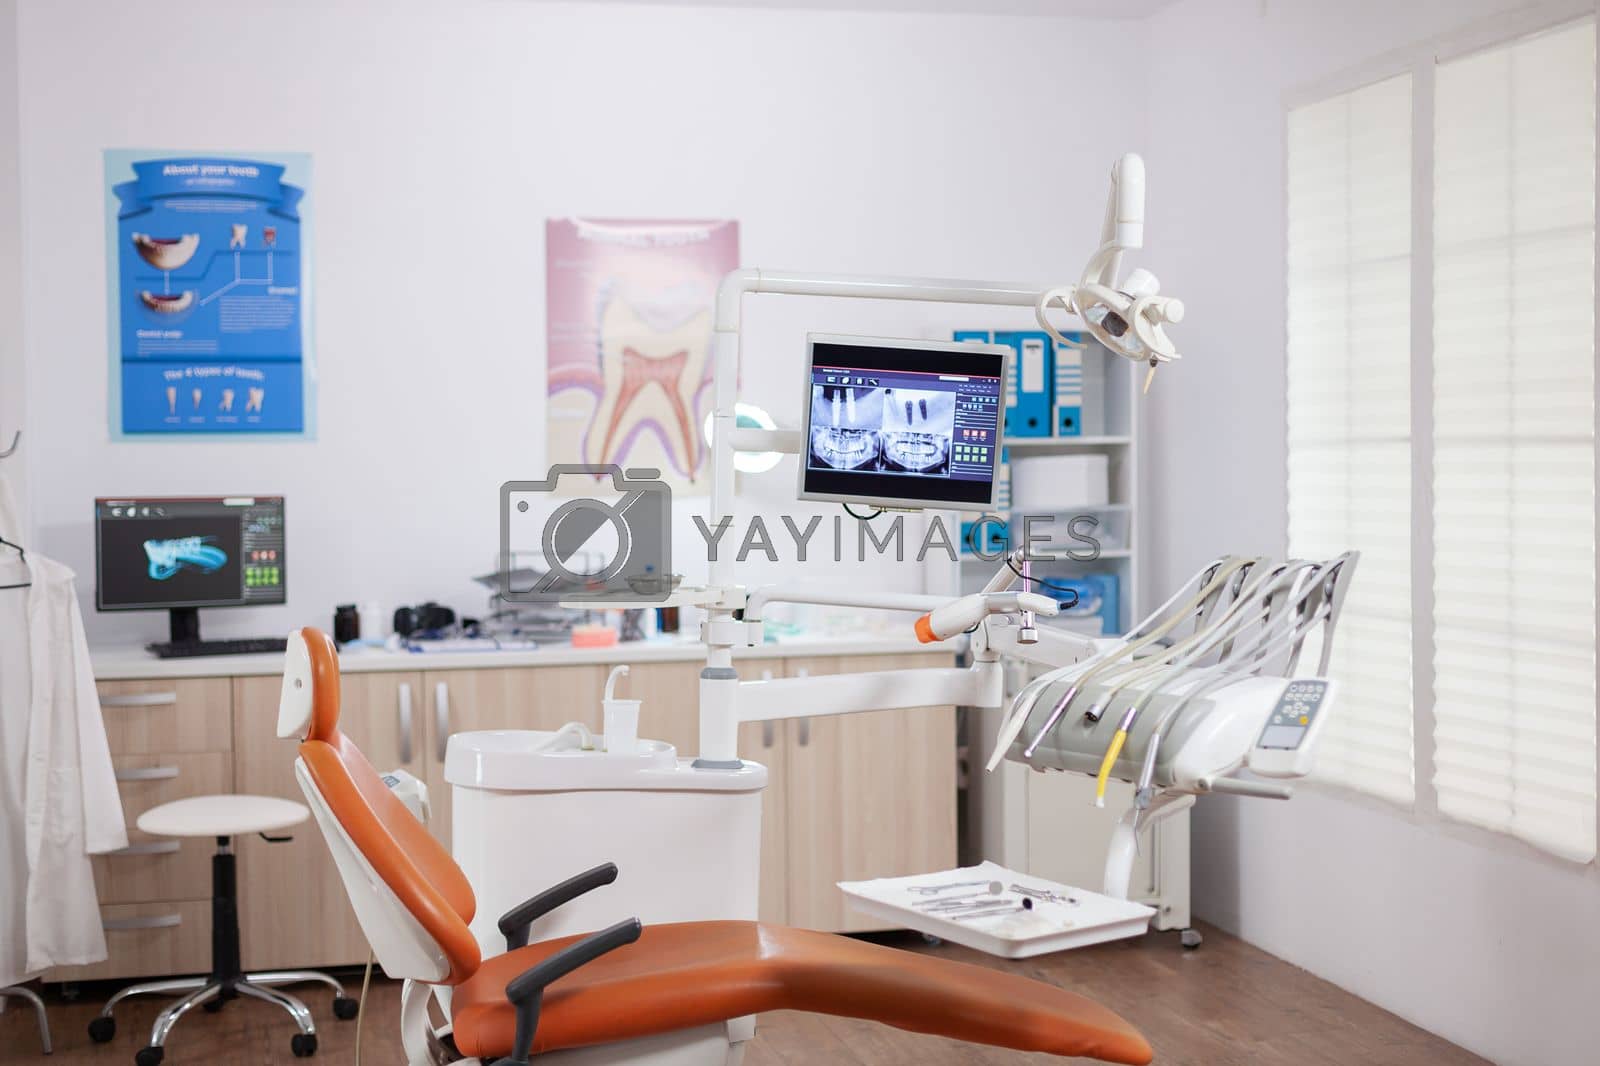 Royalty free image of Dental chair and other accesorries used by dentist by DCStudio